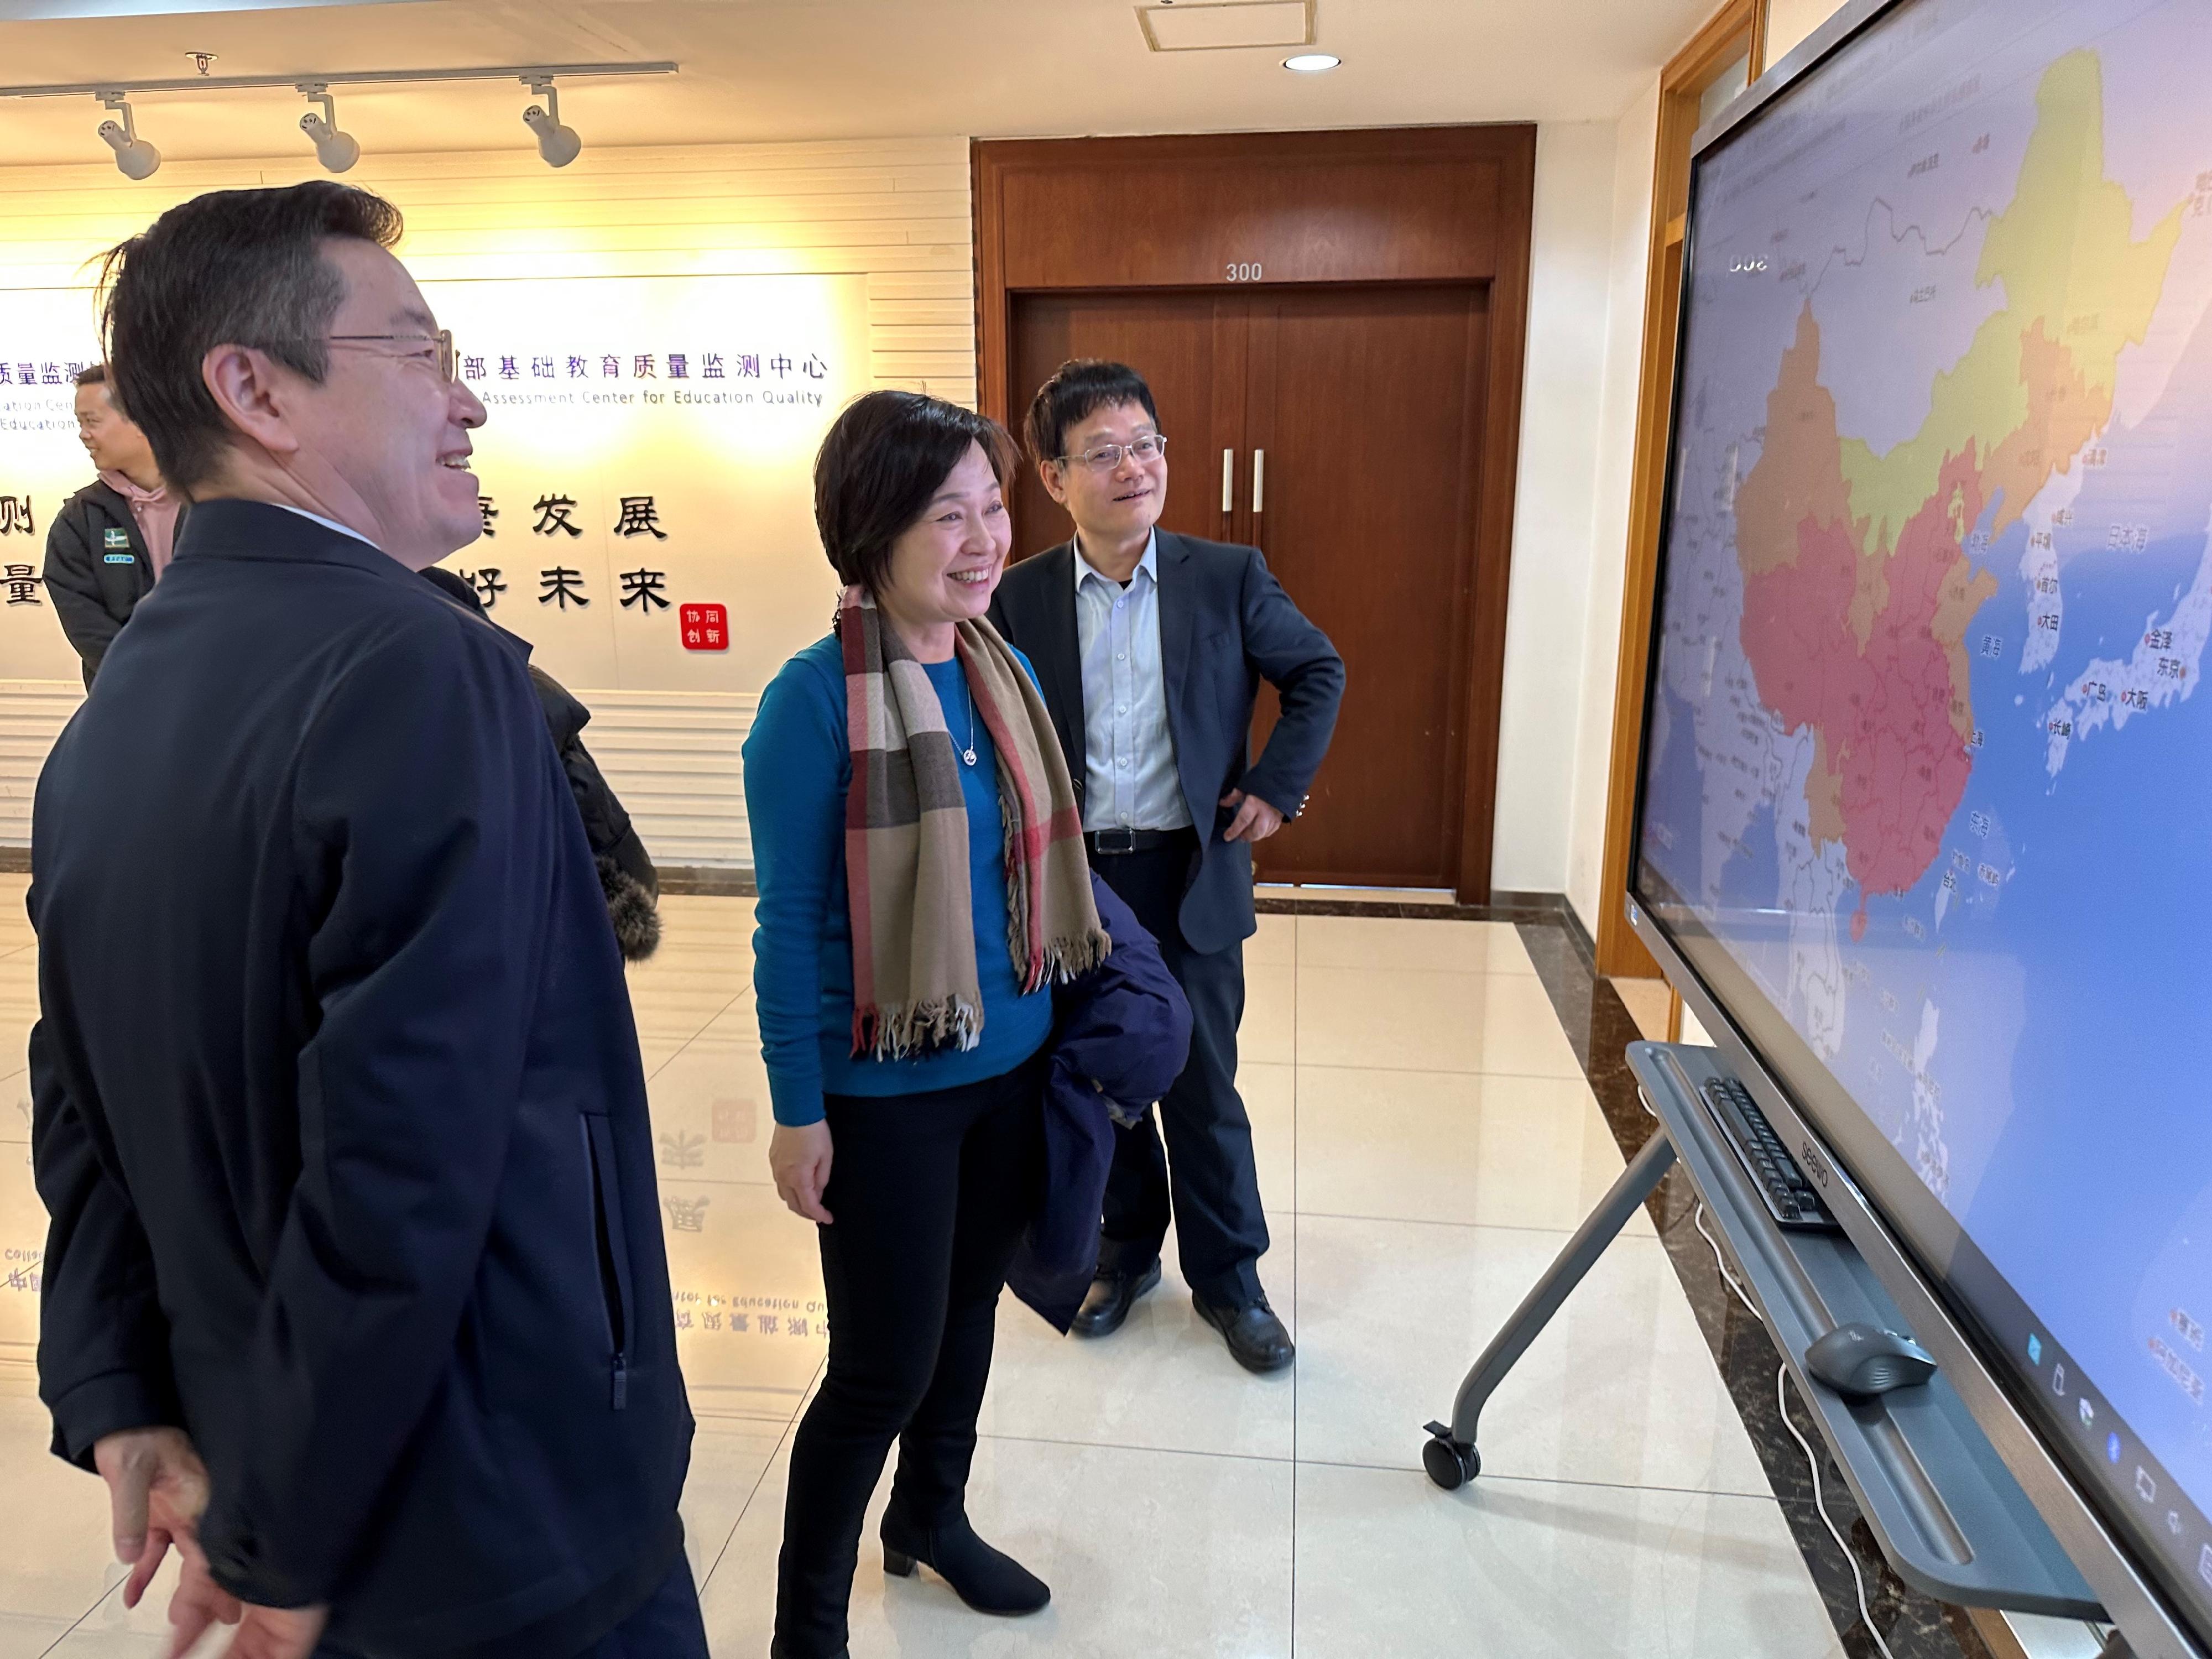 The Secretary for Education, Dr Choi Yuk-lin, yesterday (March 15) visited Beijing Normal University in Beijing. Photo shows Dr Choi (centre) touring the National Assessment Center for Education Quality on the campus.